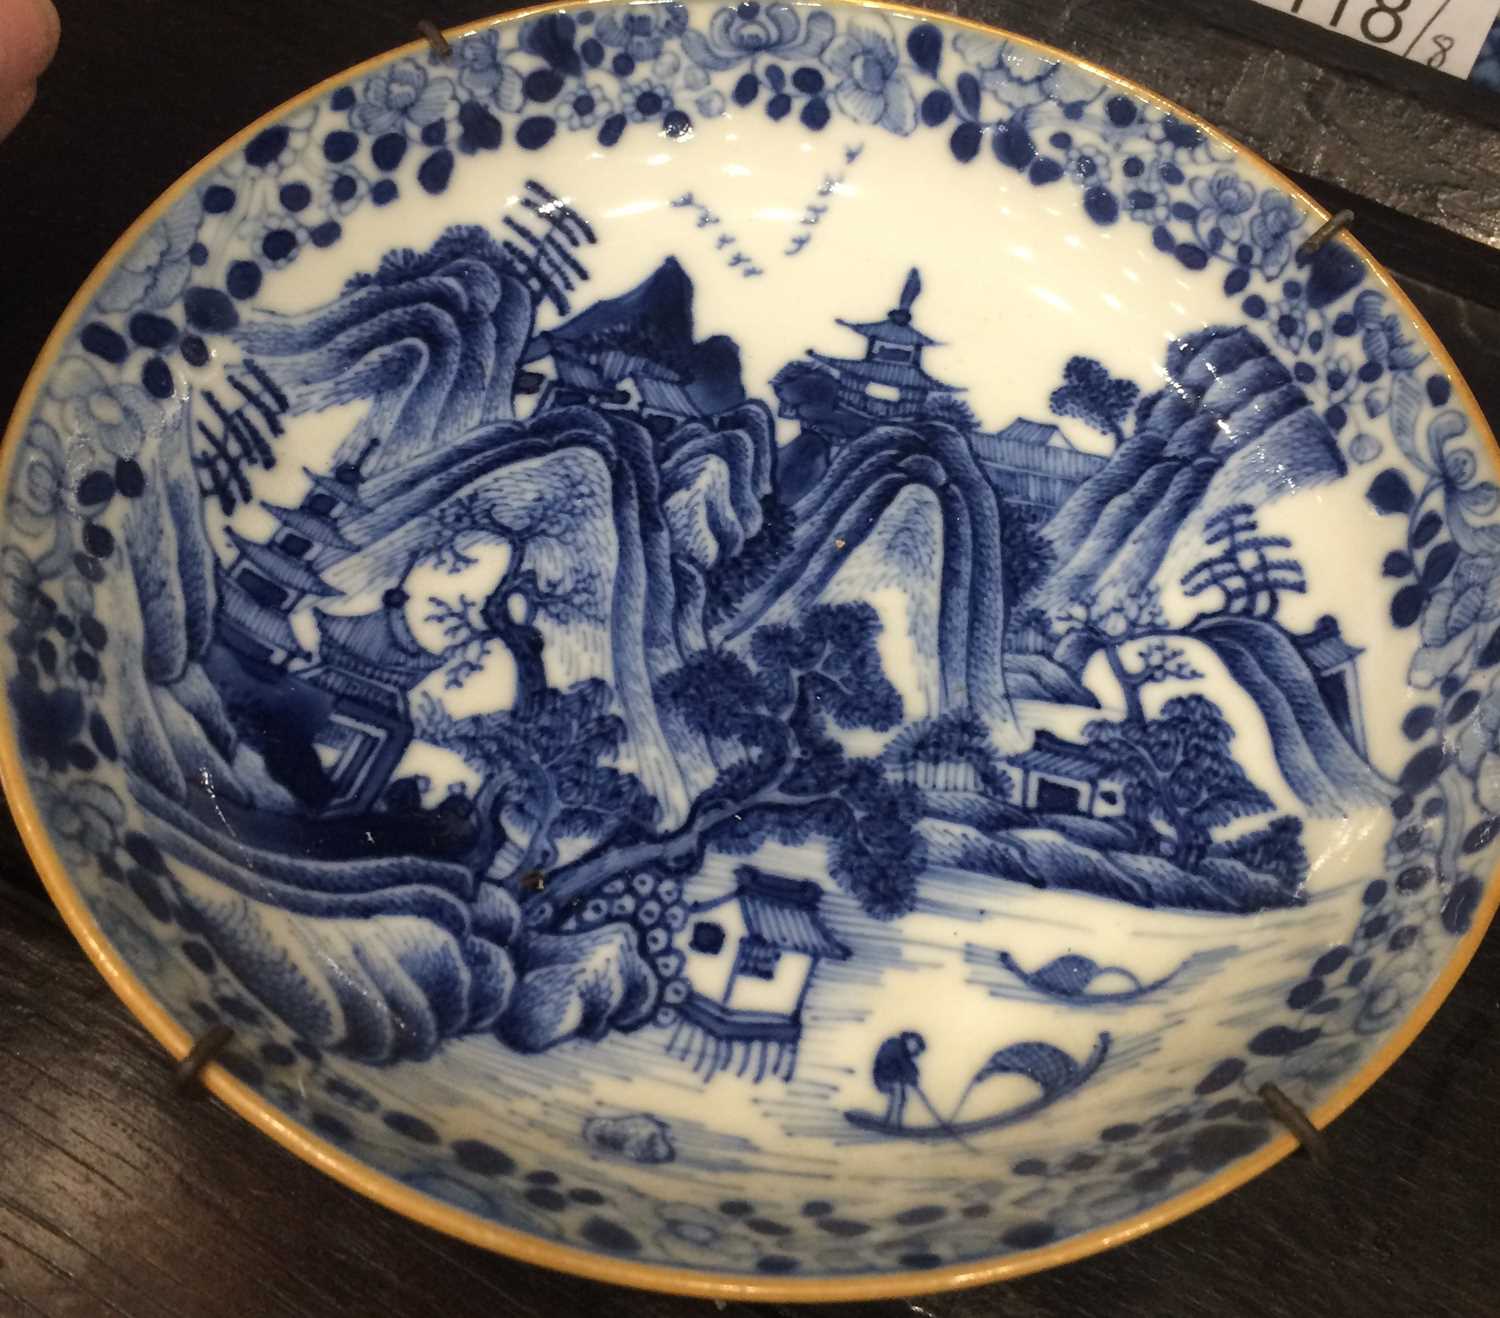 A Chinese Porcelain Bowl and Cover, 17th century style, painted in underglaze blue with ducks in a - Image 5 of 19